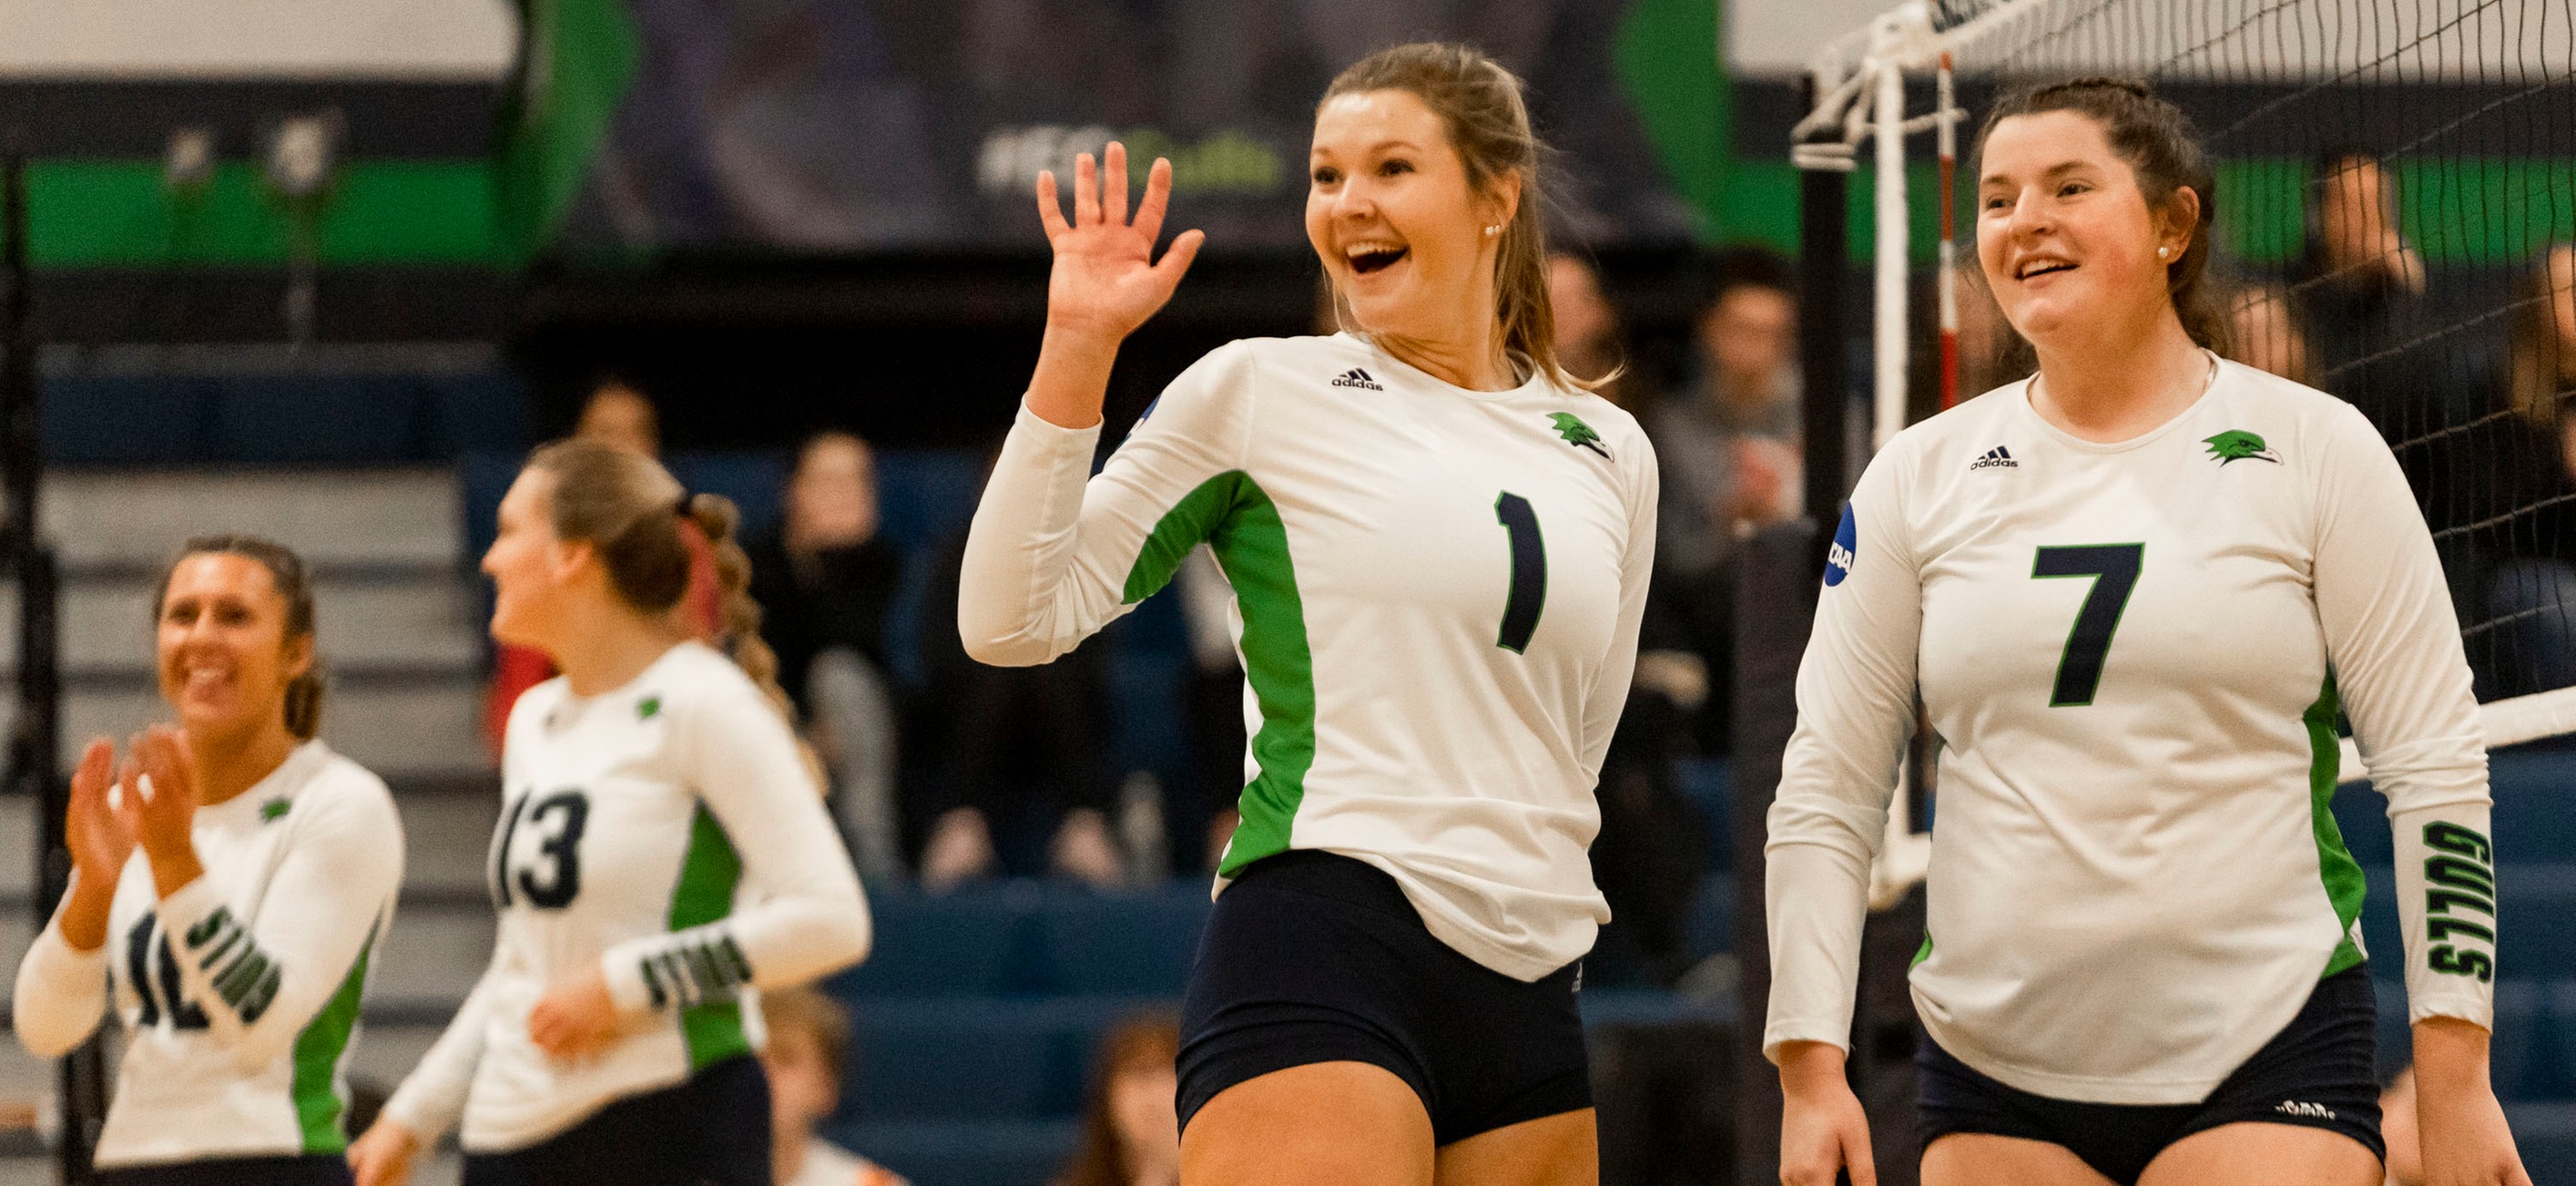 Amanda Gilbert waves after being acknowledged for her 1,000th career kill.